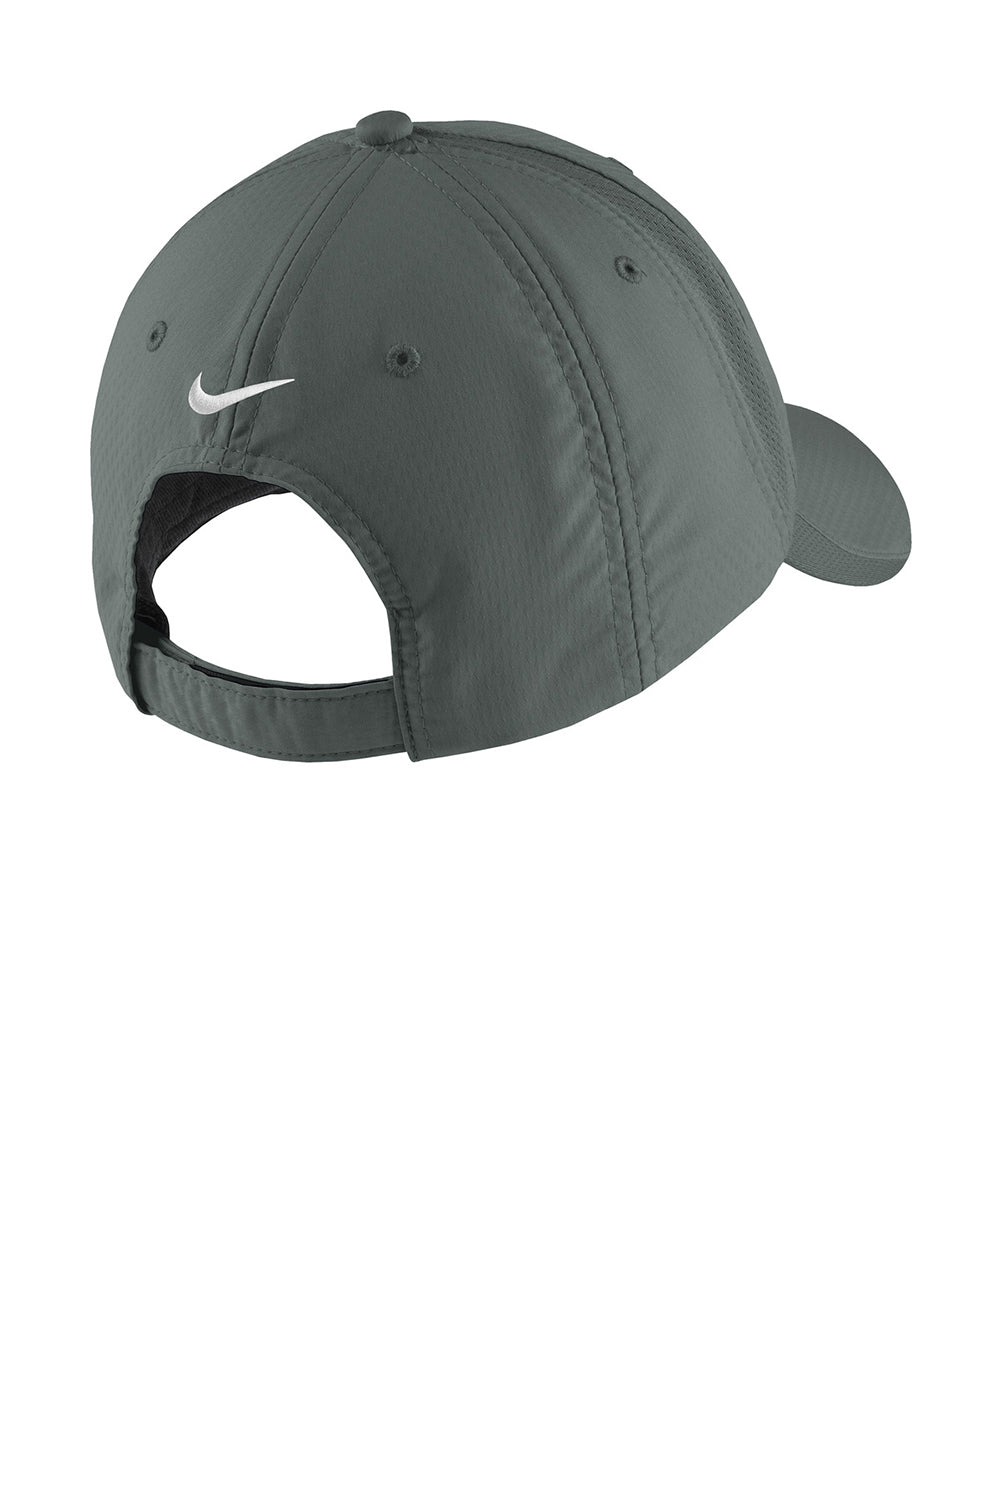 Nike 247077/NKFD9709  Sphere Dry Moisture Wicking Adjustable Hat Anthracite Grey Flat Back